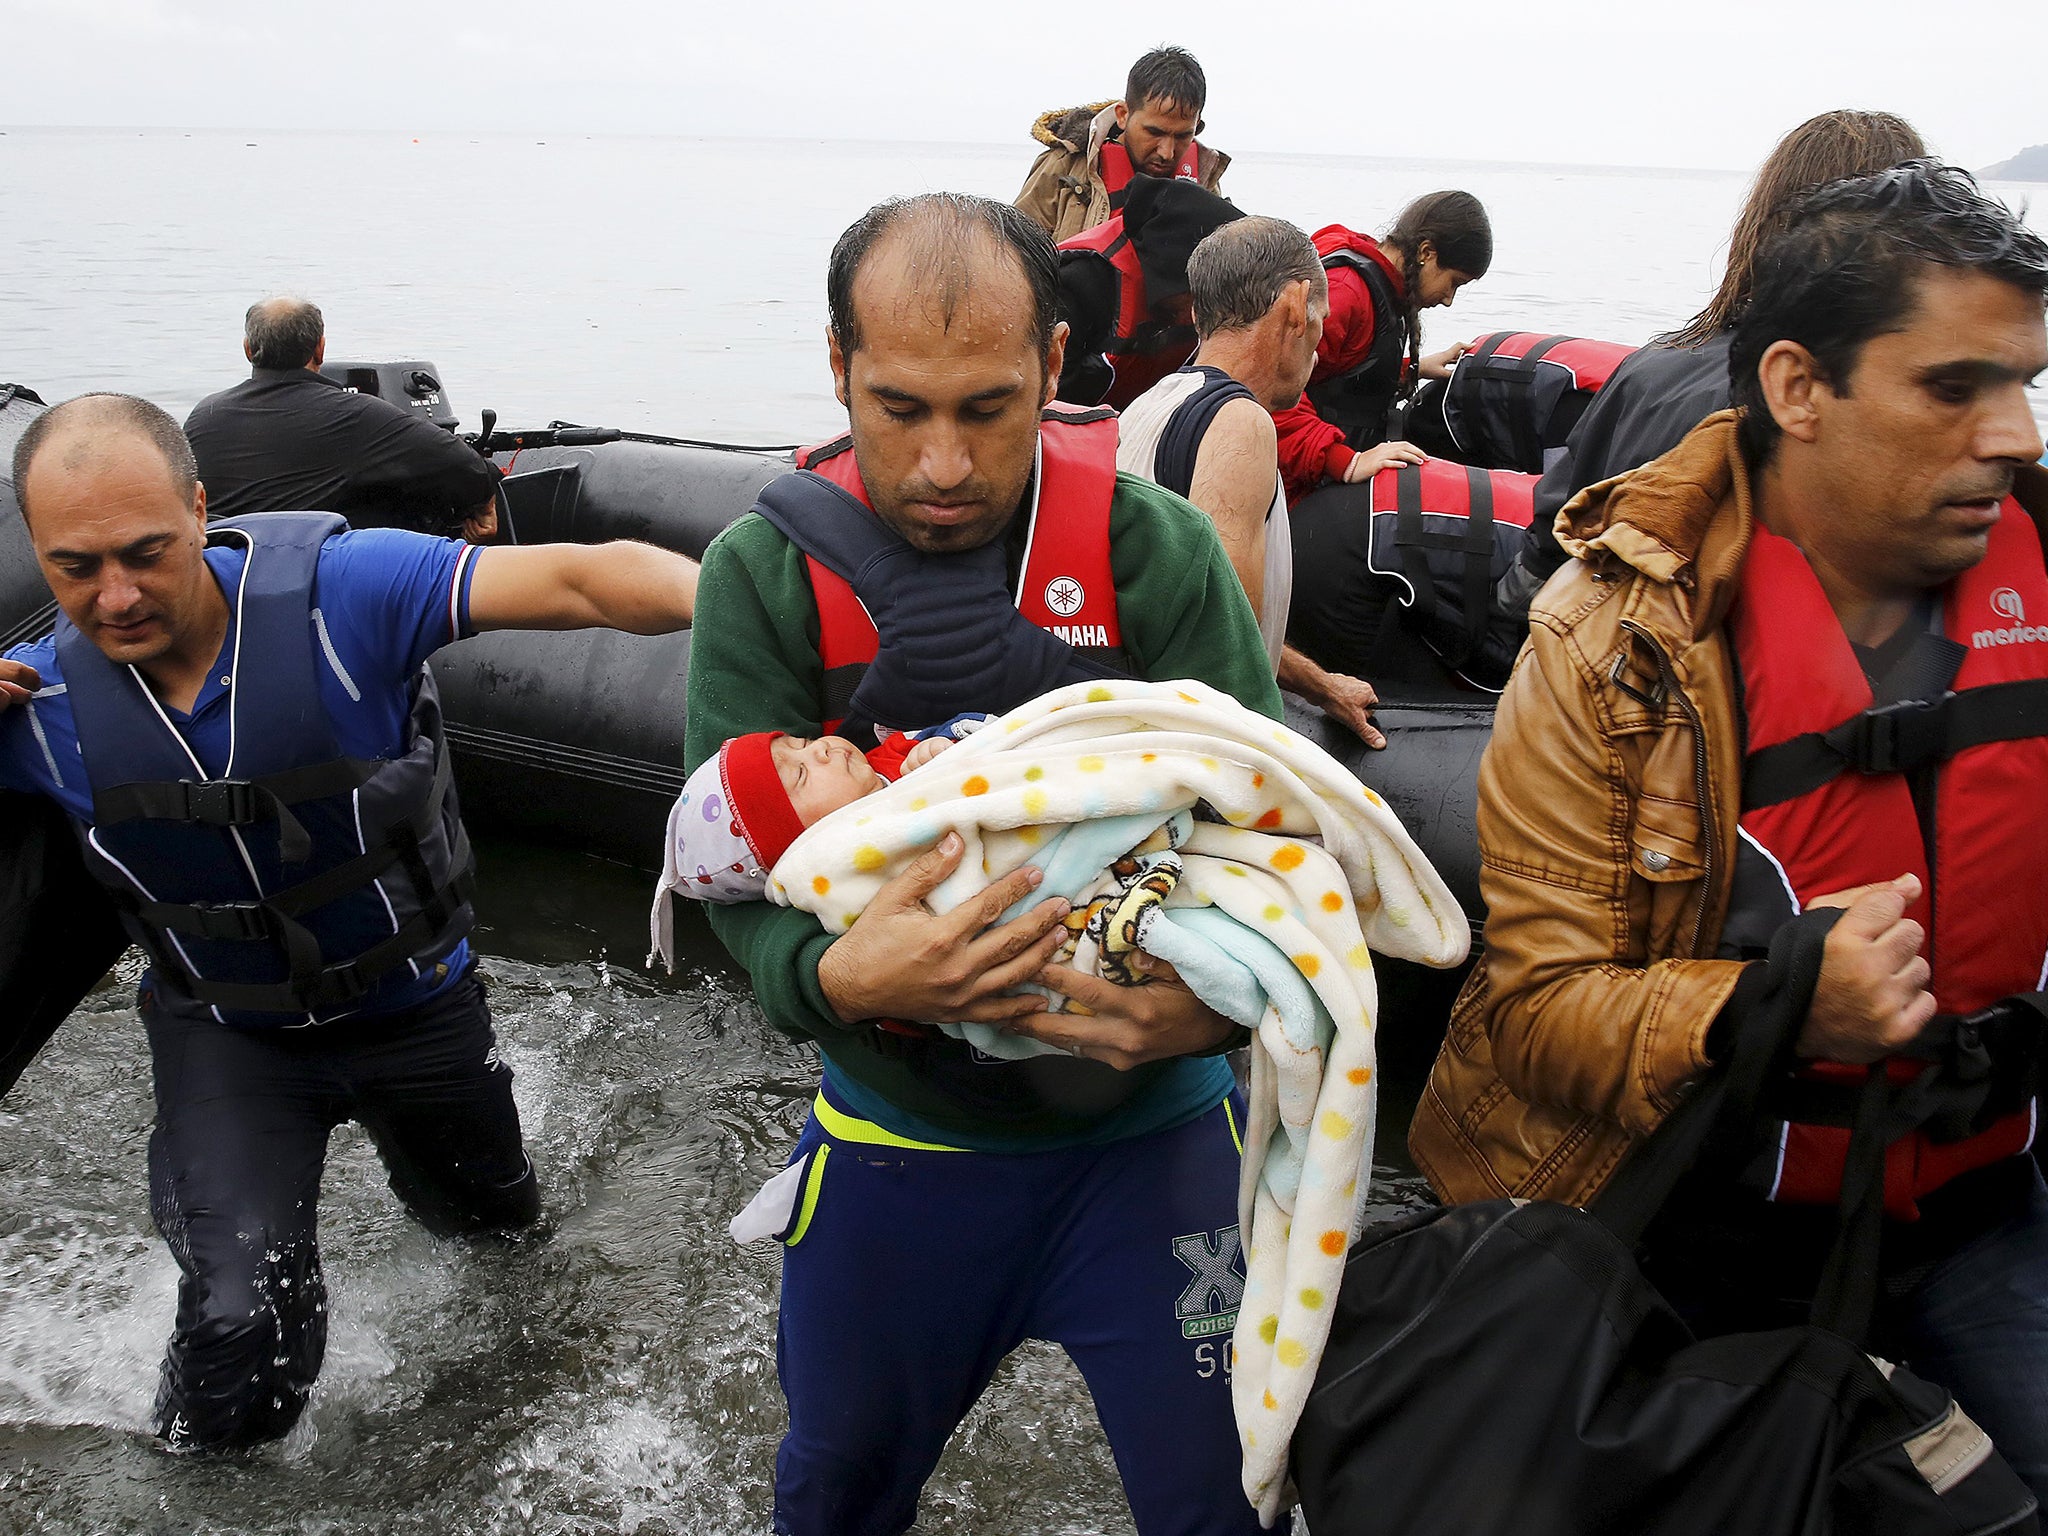 There are fears that more refugees will die as the weather worsens